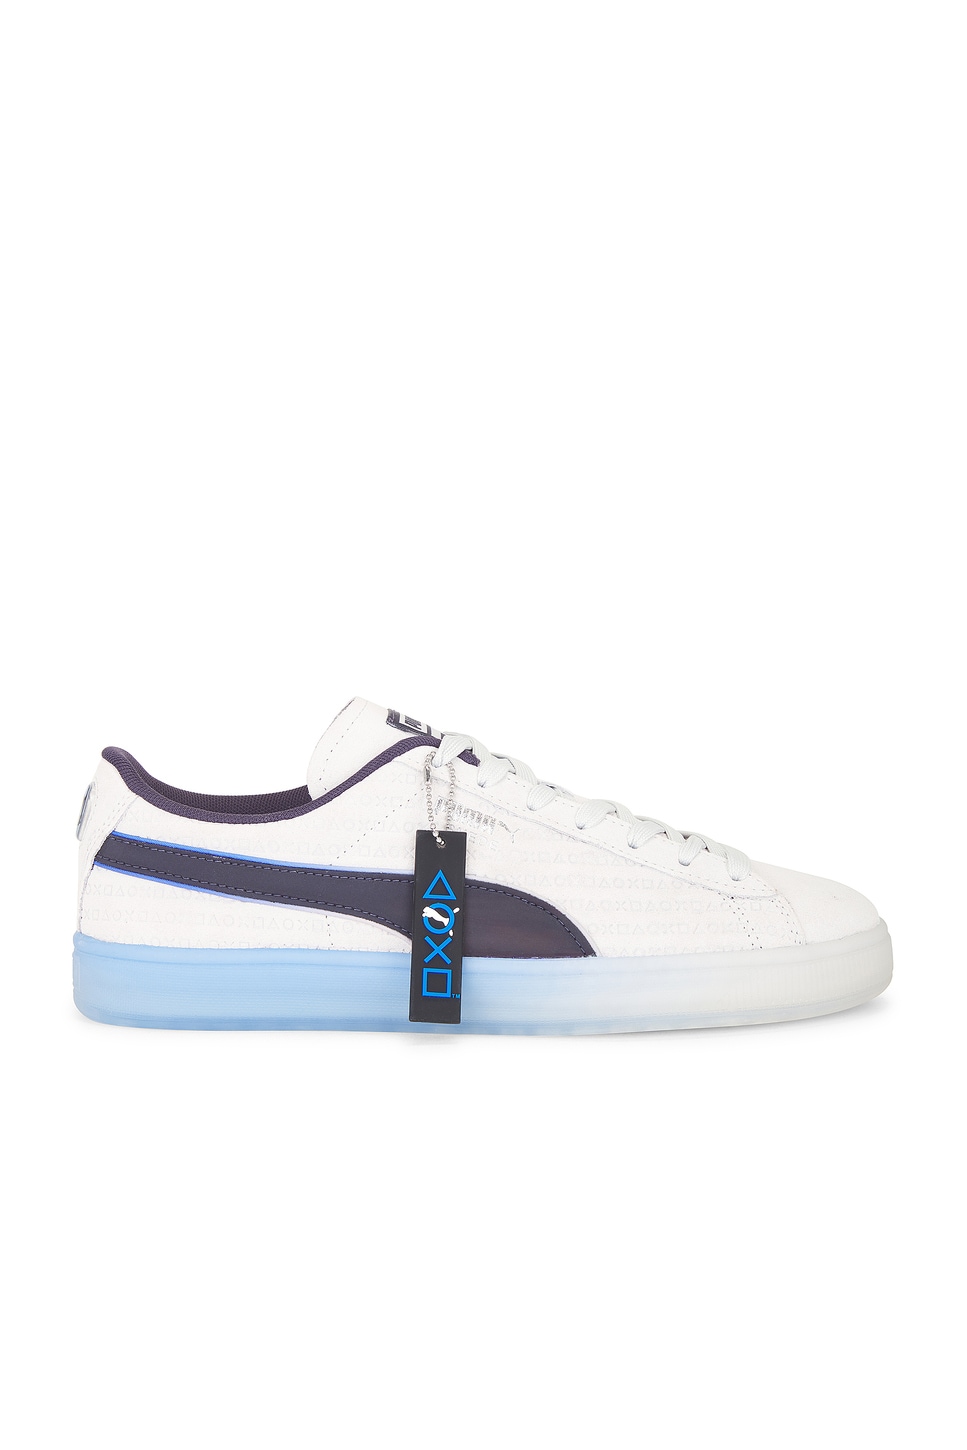 Image 1 of Puma Select x Playstation Suede in Glacial Gray & New Navy